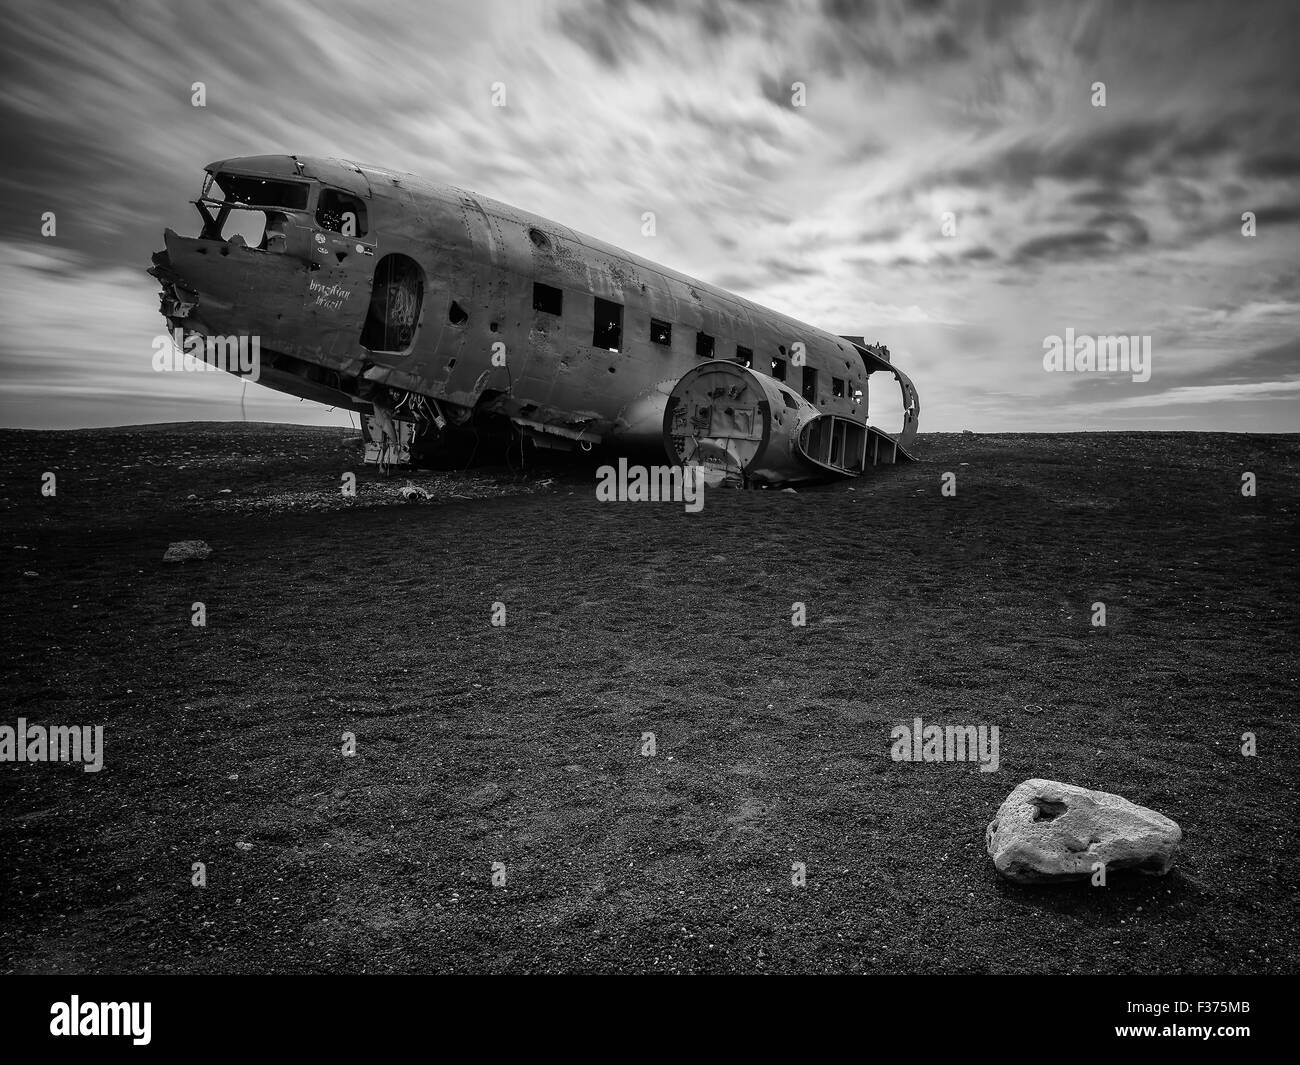 Abandoned plane in a deserted black sand beach in Iceland. Stock Photo